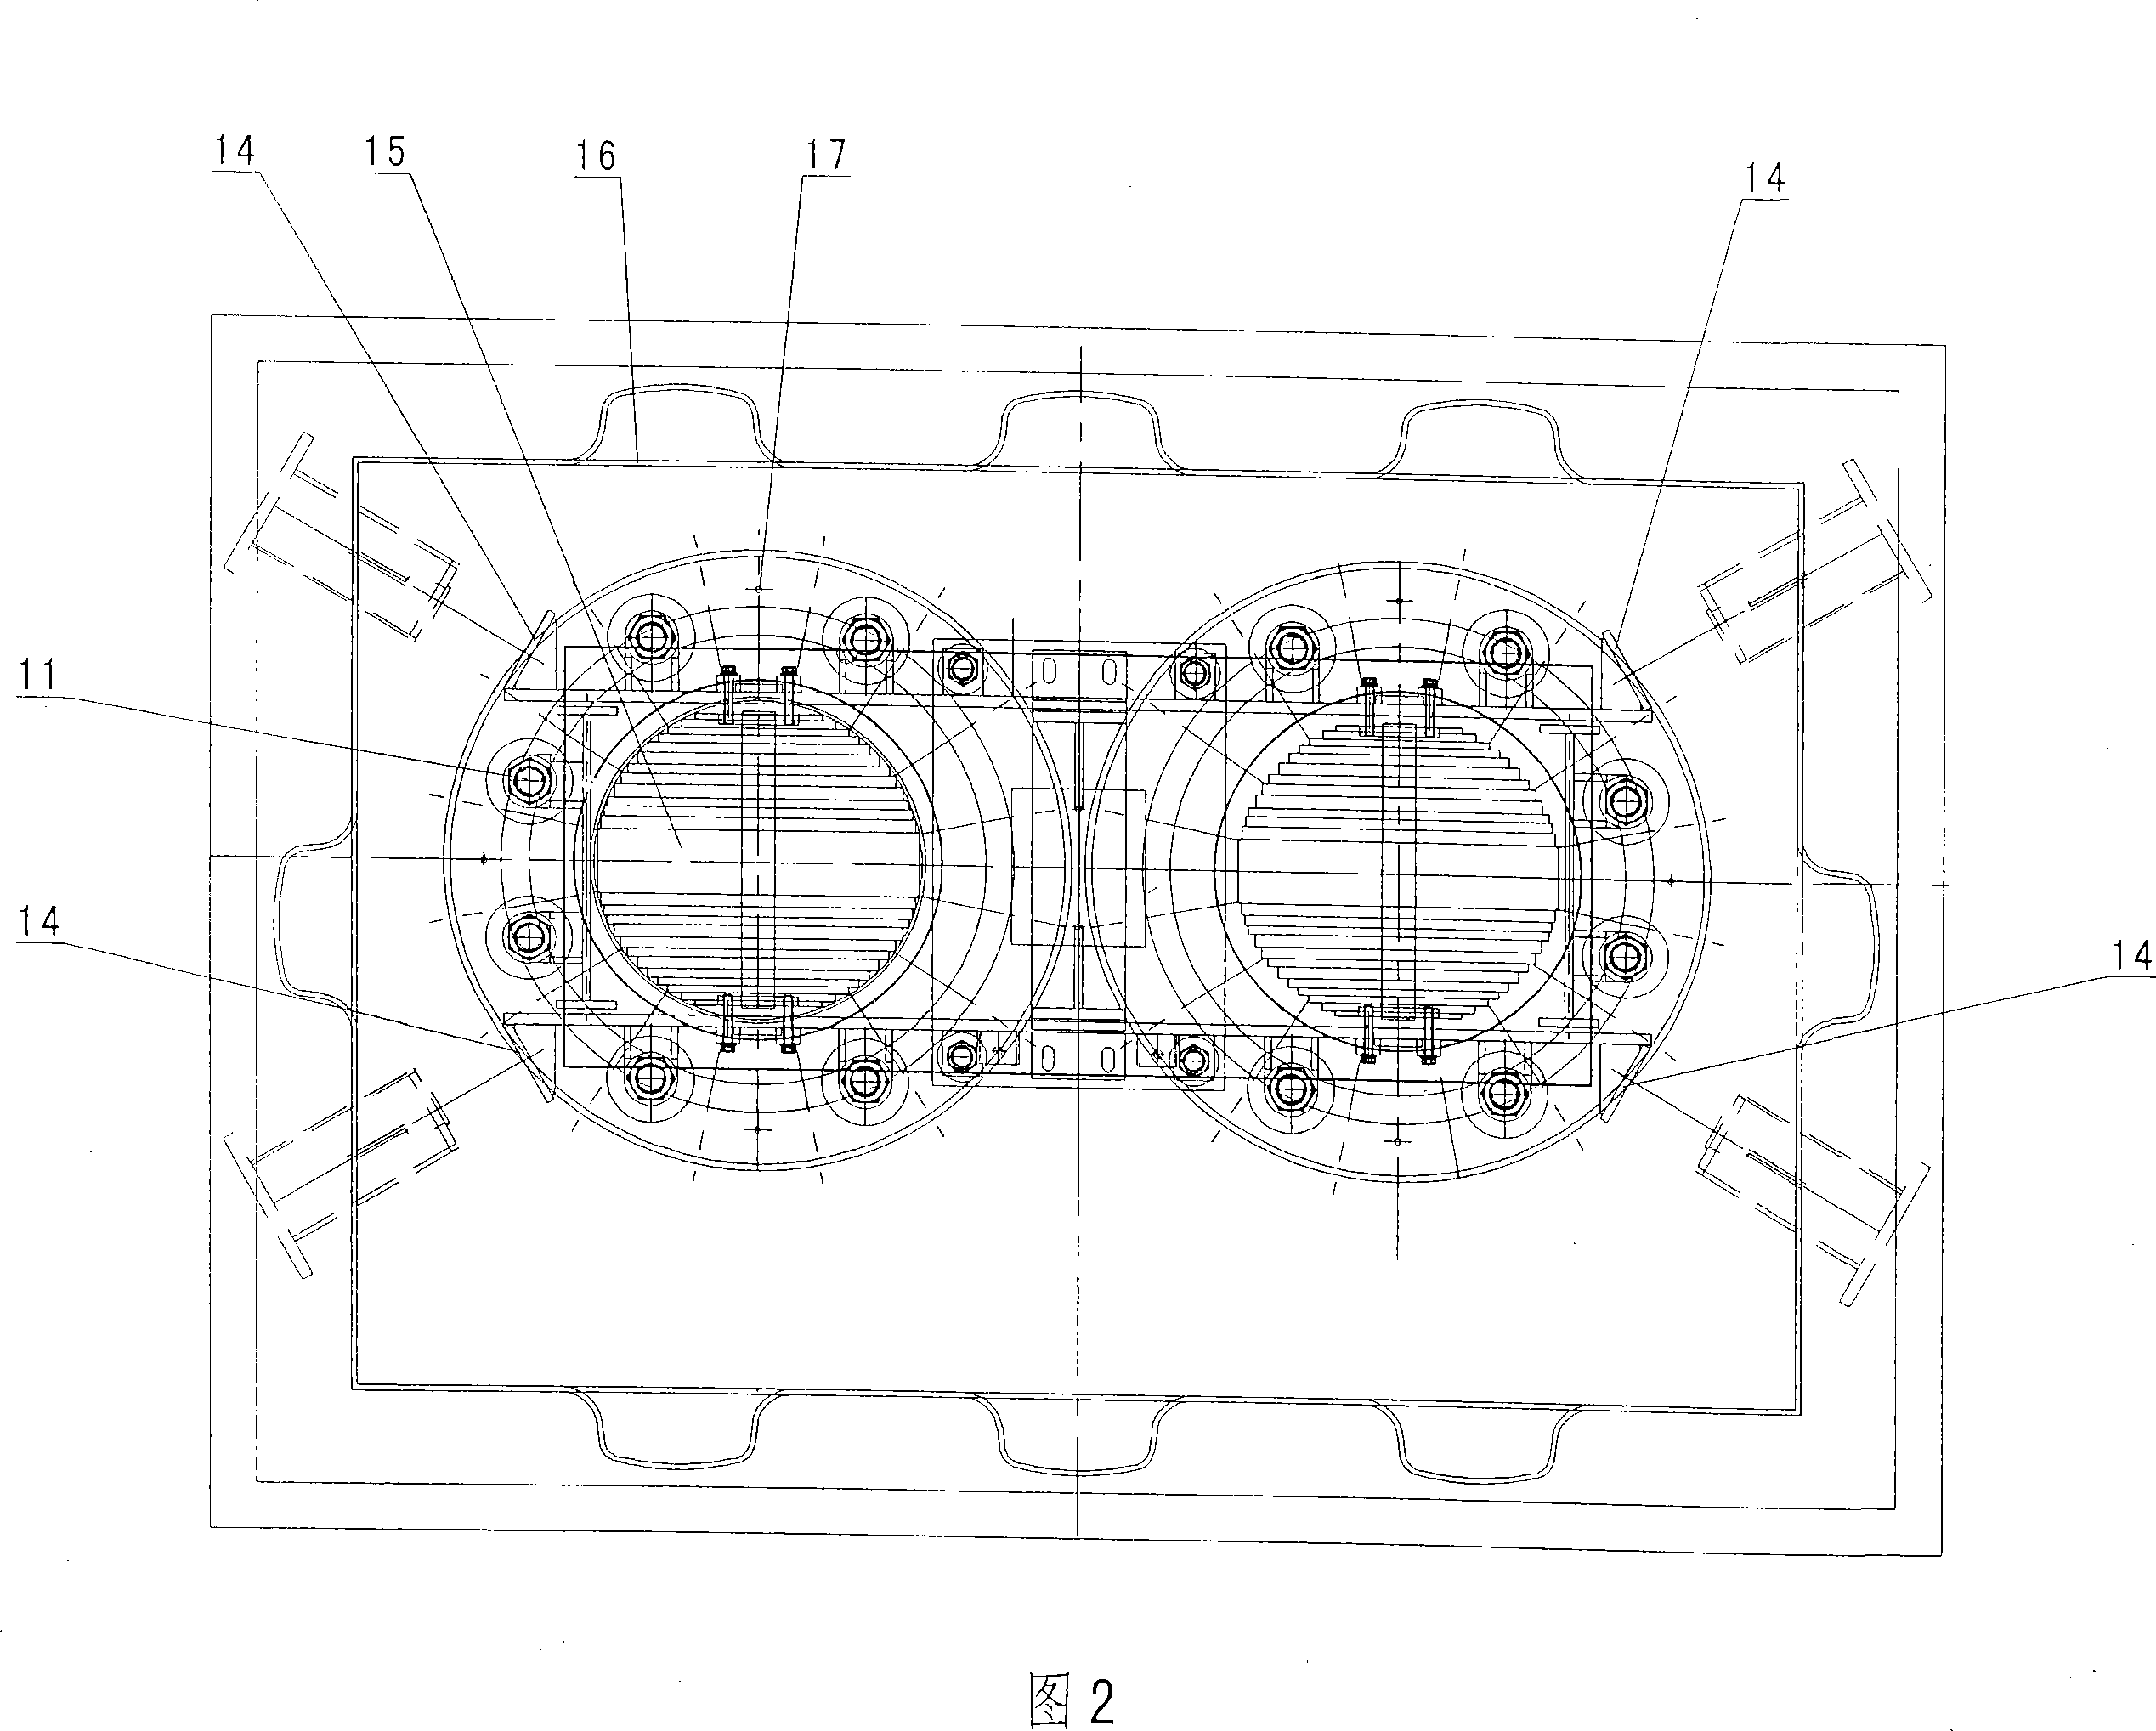 Body structure of single-phase traction transformer